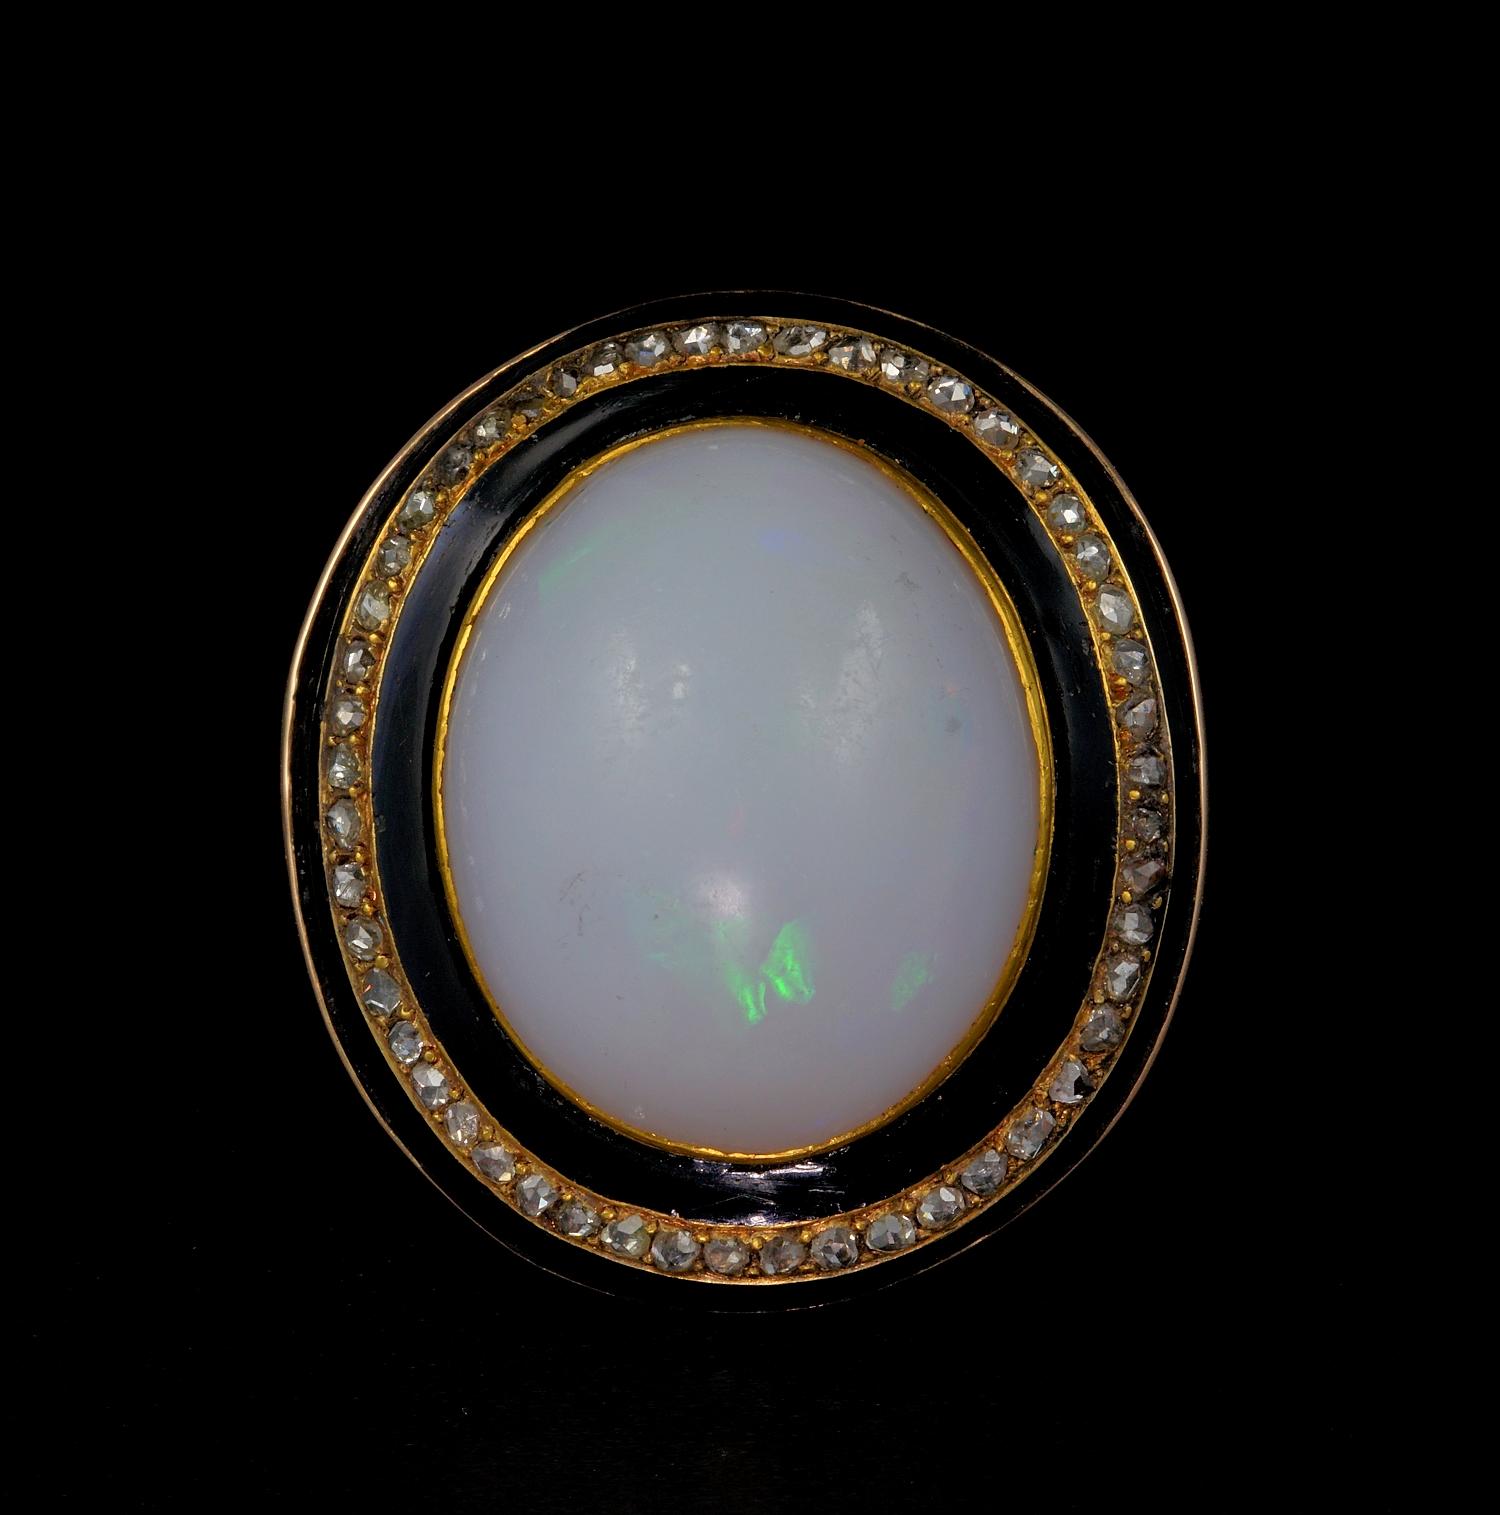 Distinction in the Georgian Era

This magnificent Georgian period ring is an unique and one off, hardly seen of this exceptional features
The real star of this rare ring is the huge Natural Opal set as focal point
Mostly milky white and so unusual,